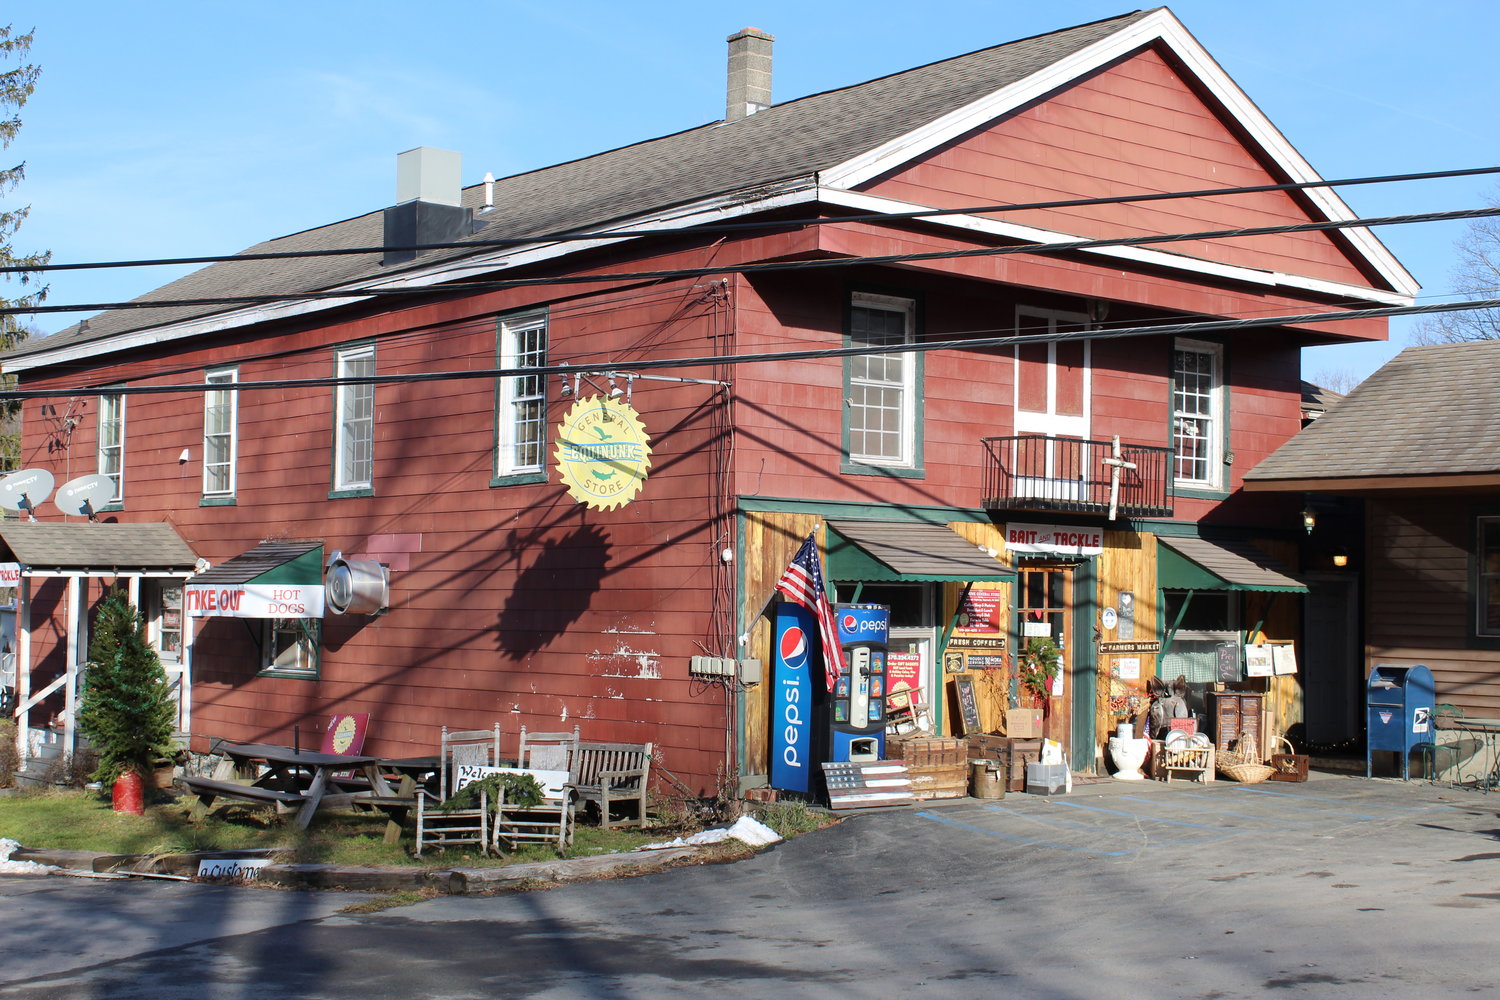 At the Equinunk General Store, now owned by Jutta Bishop, you can find a variety of locally-produced food.